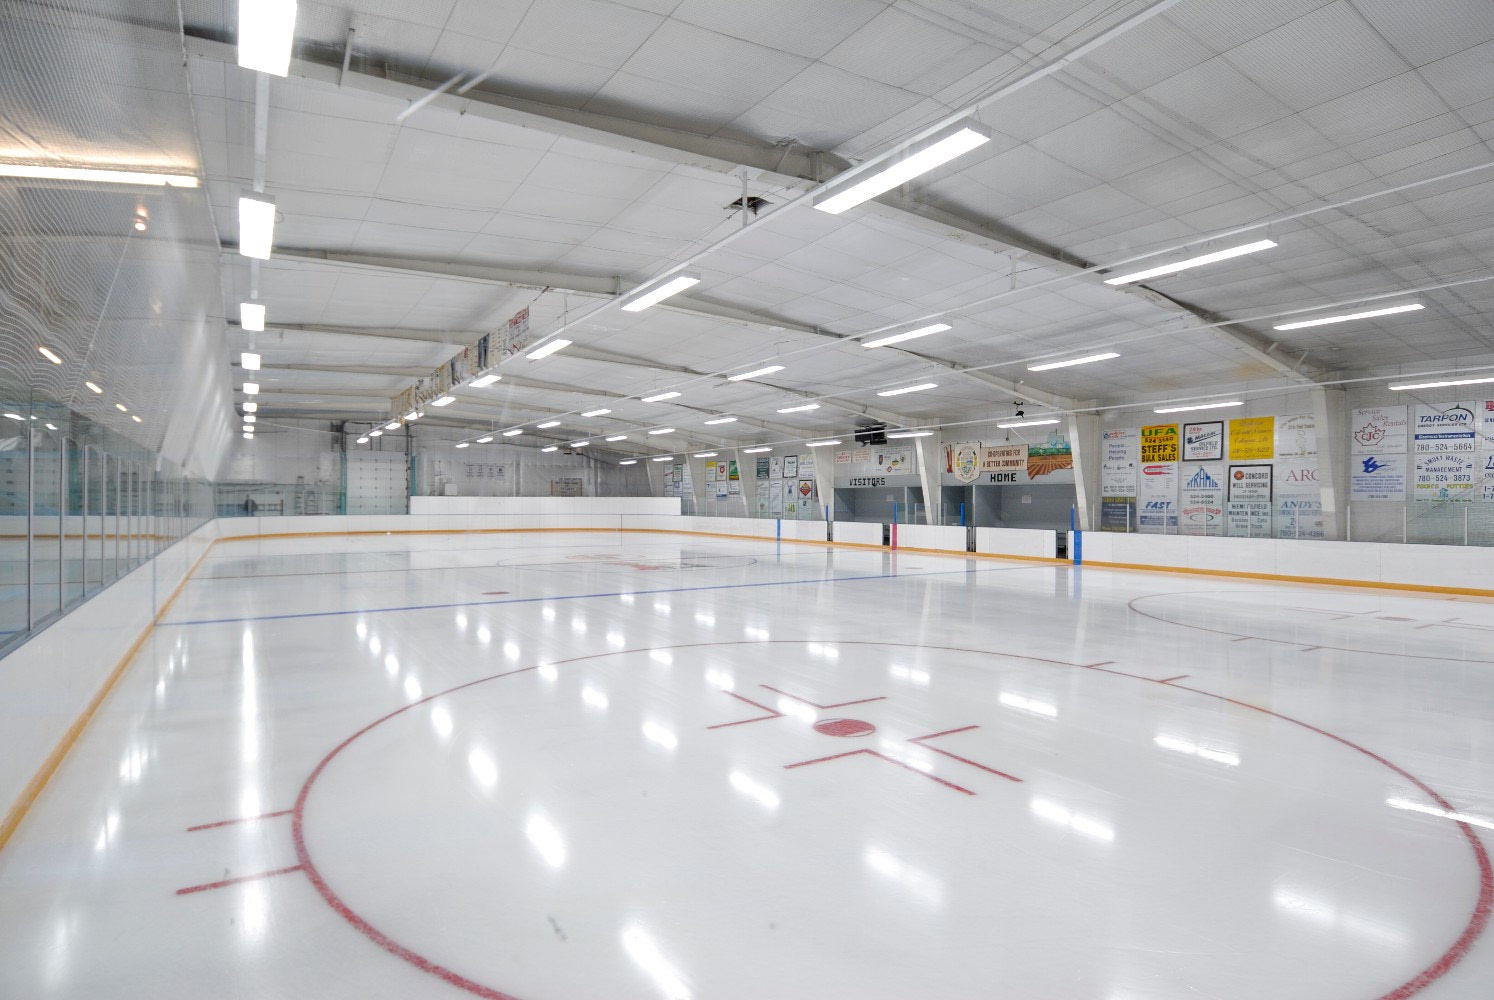 LED lighting solutions for a hockey arena